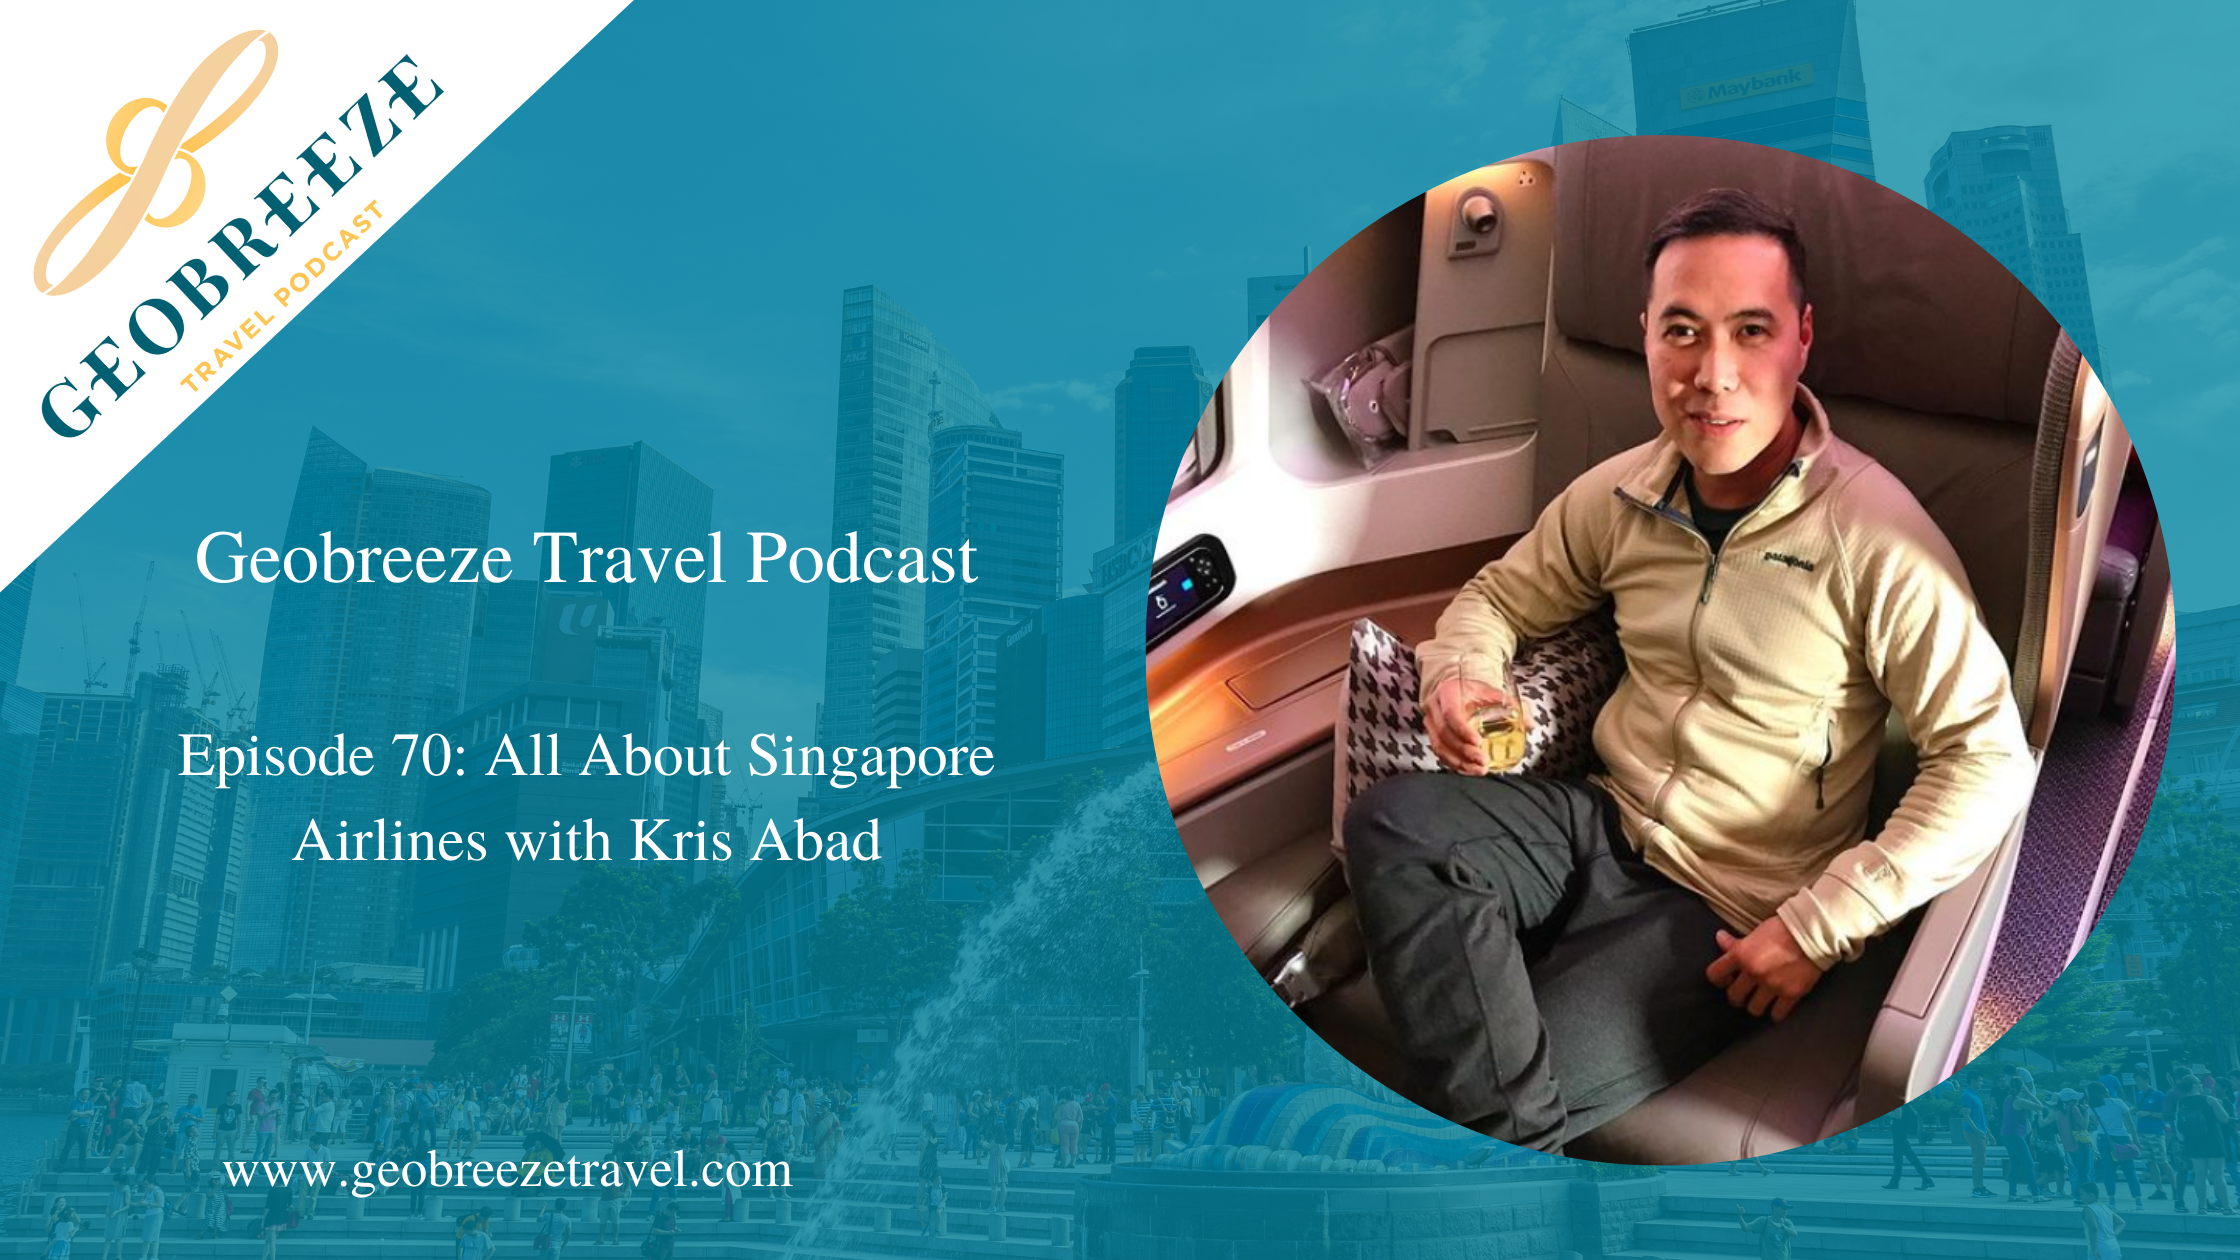 Episode 70: All About Singapore Airlines with Kris Abad